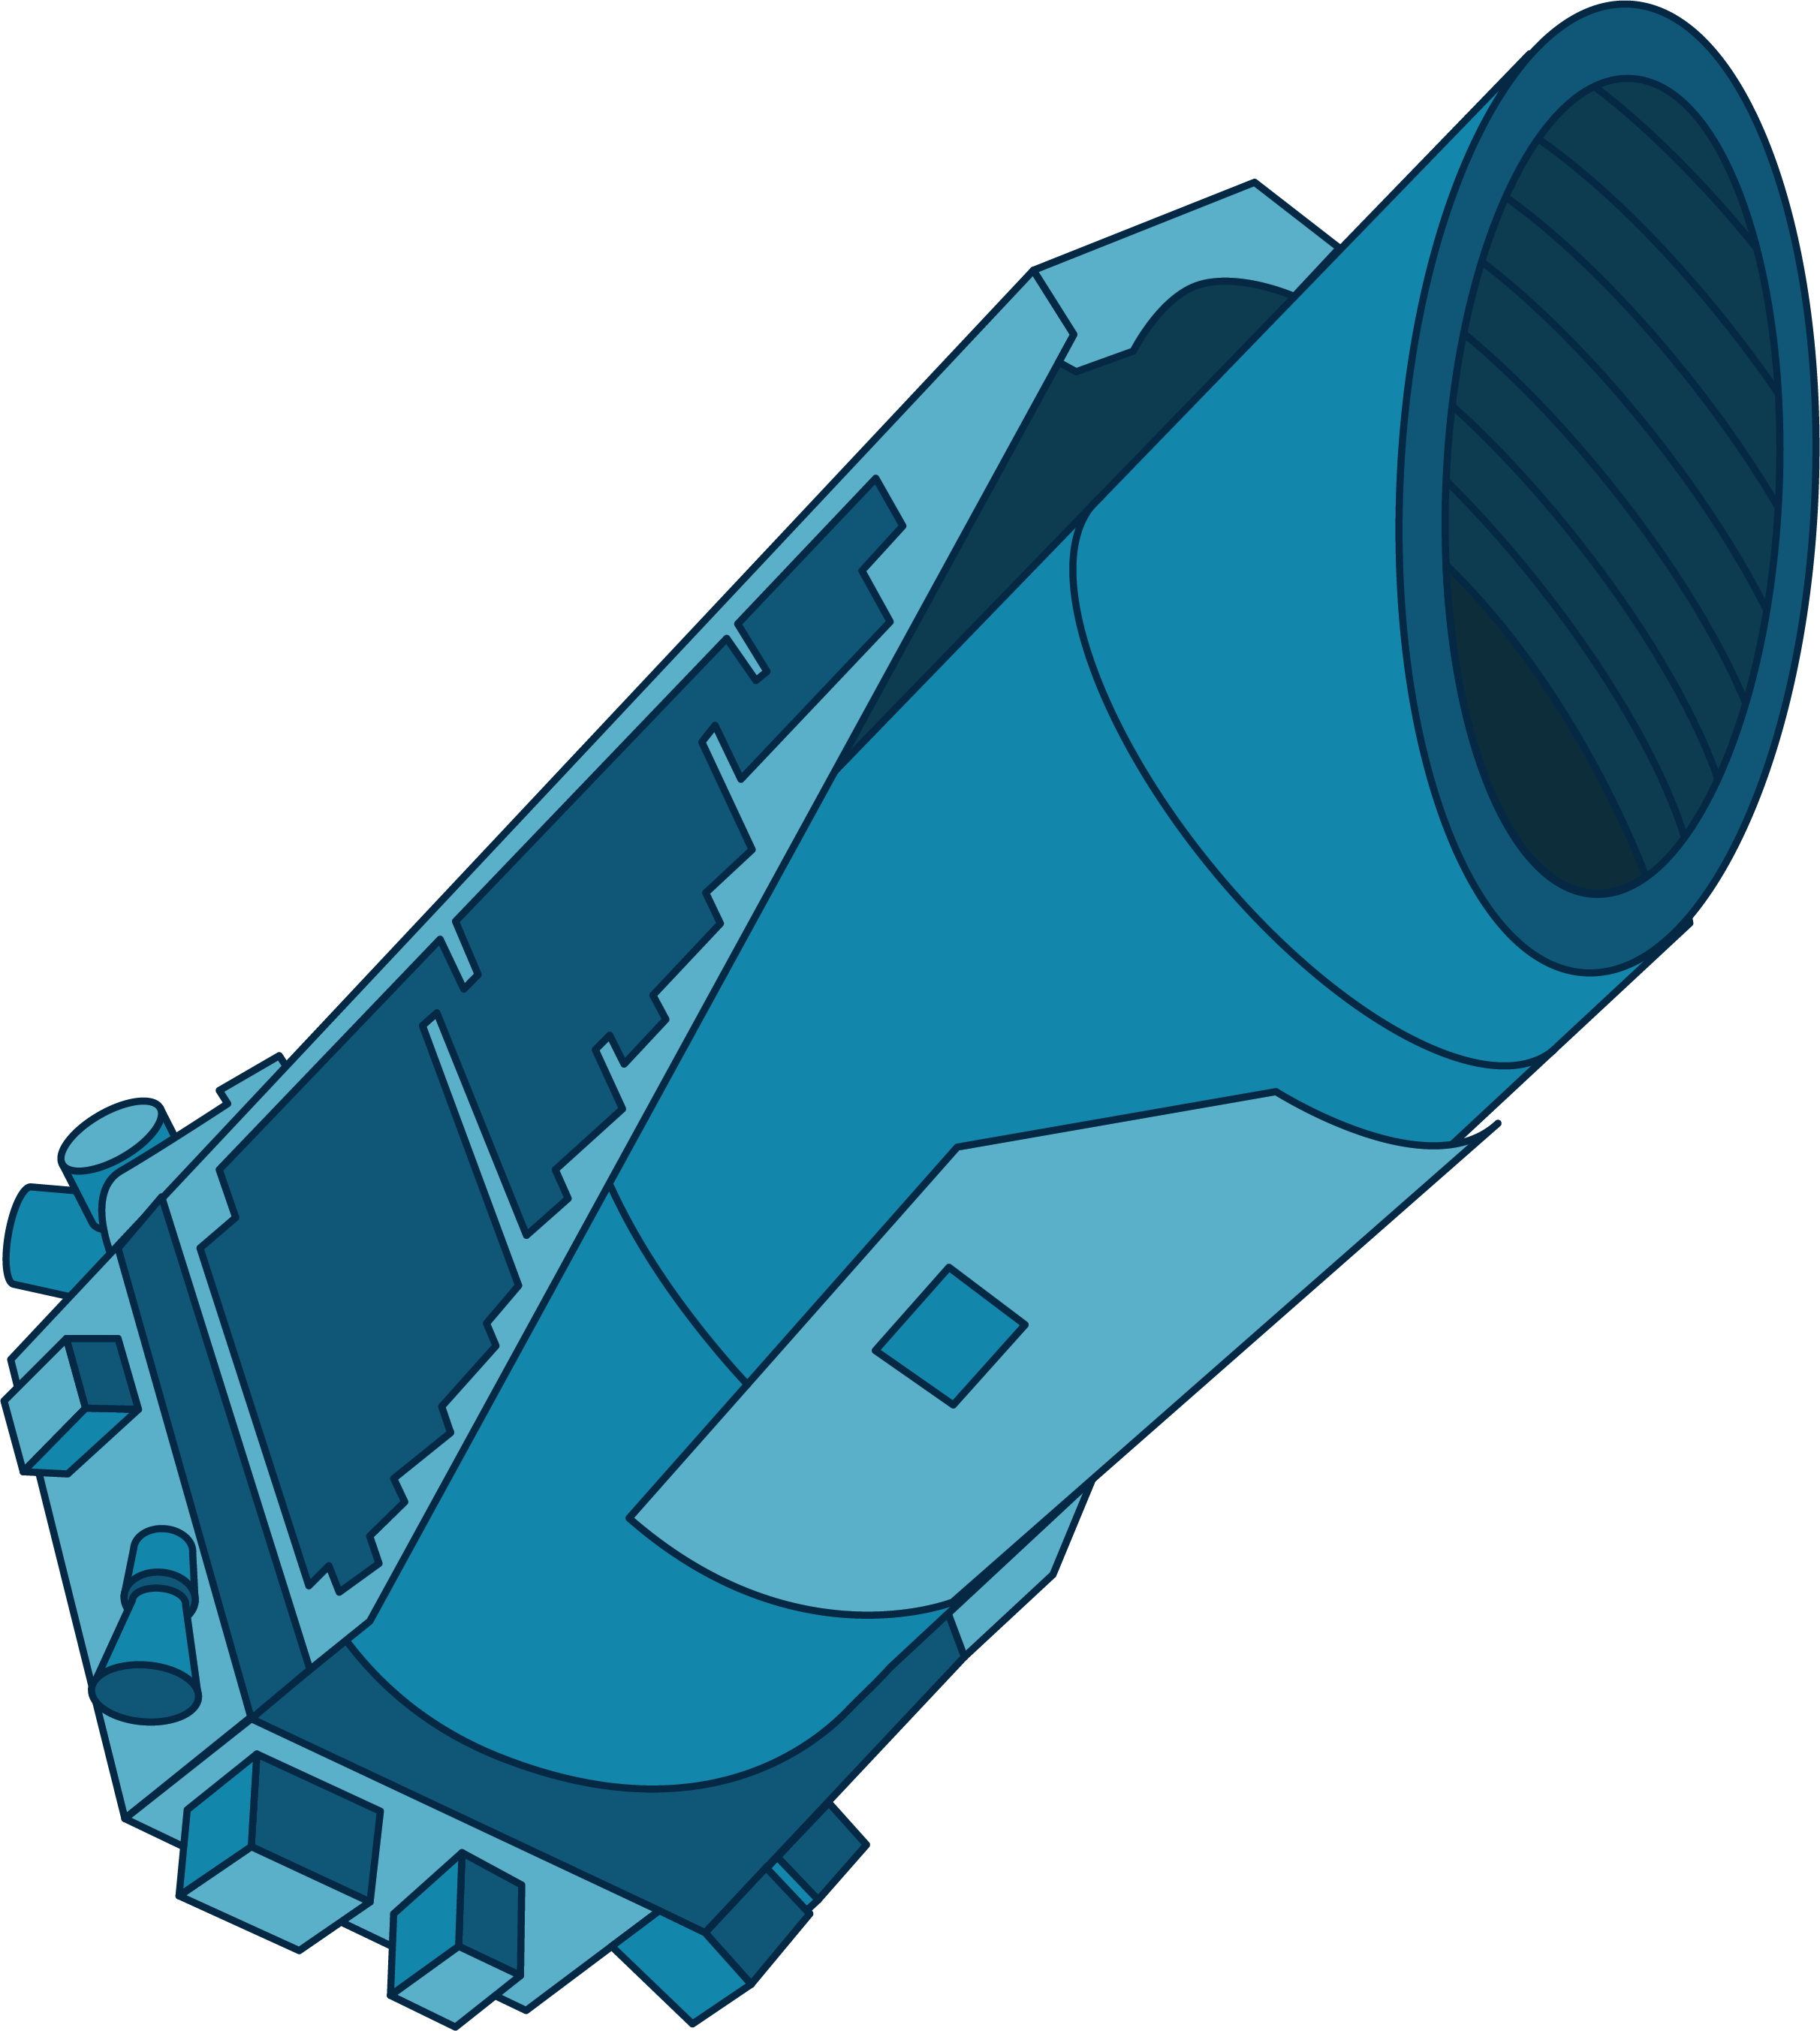 This illustration shows NASA's Kepler mission in shades of blue. The main body of the spacecraft is cylindrical in shape, with a slanted top and a base that attaches to a structure wrapping around half of the main body of the craft.